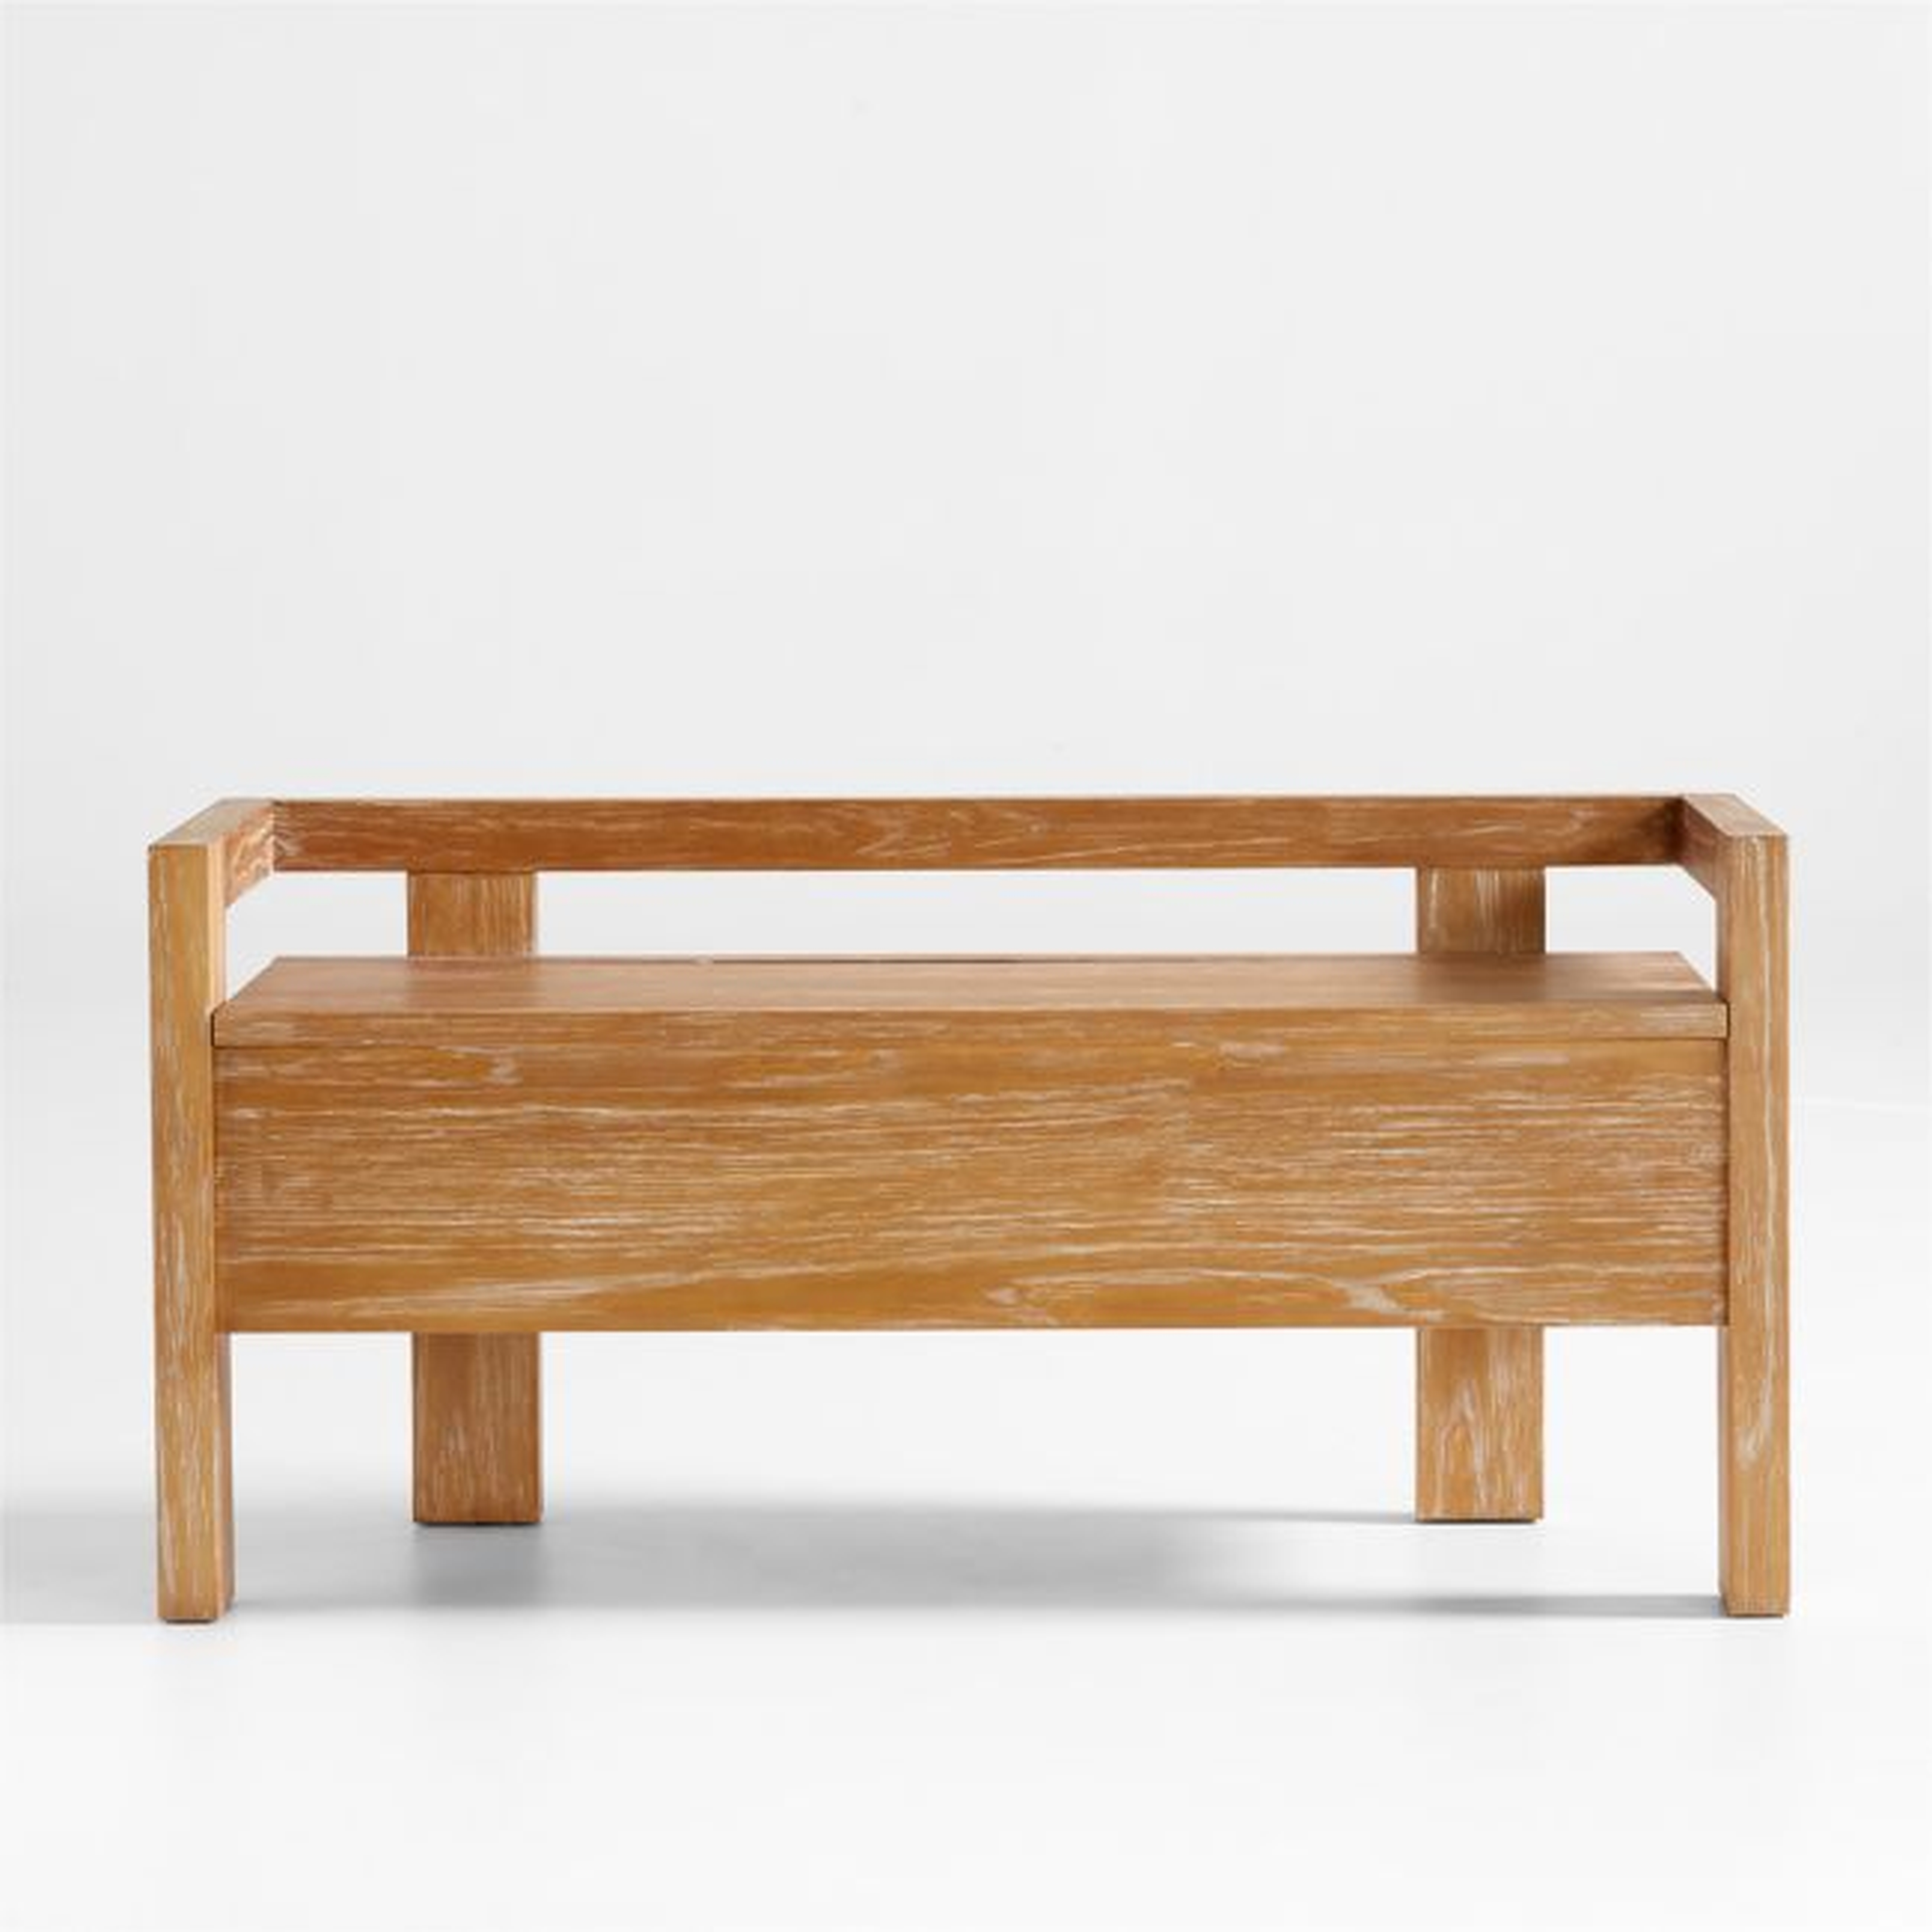 Baro Wood Entryway Storage Bench - Crate and Barrel